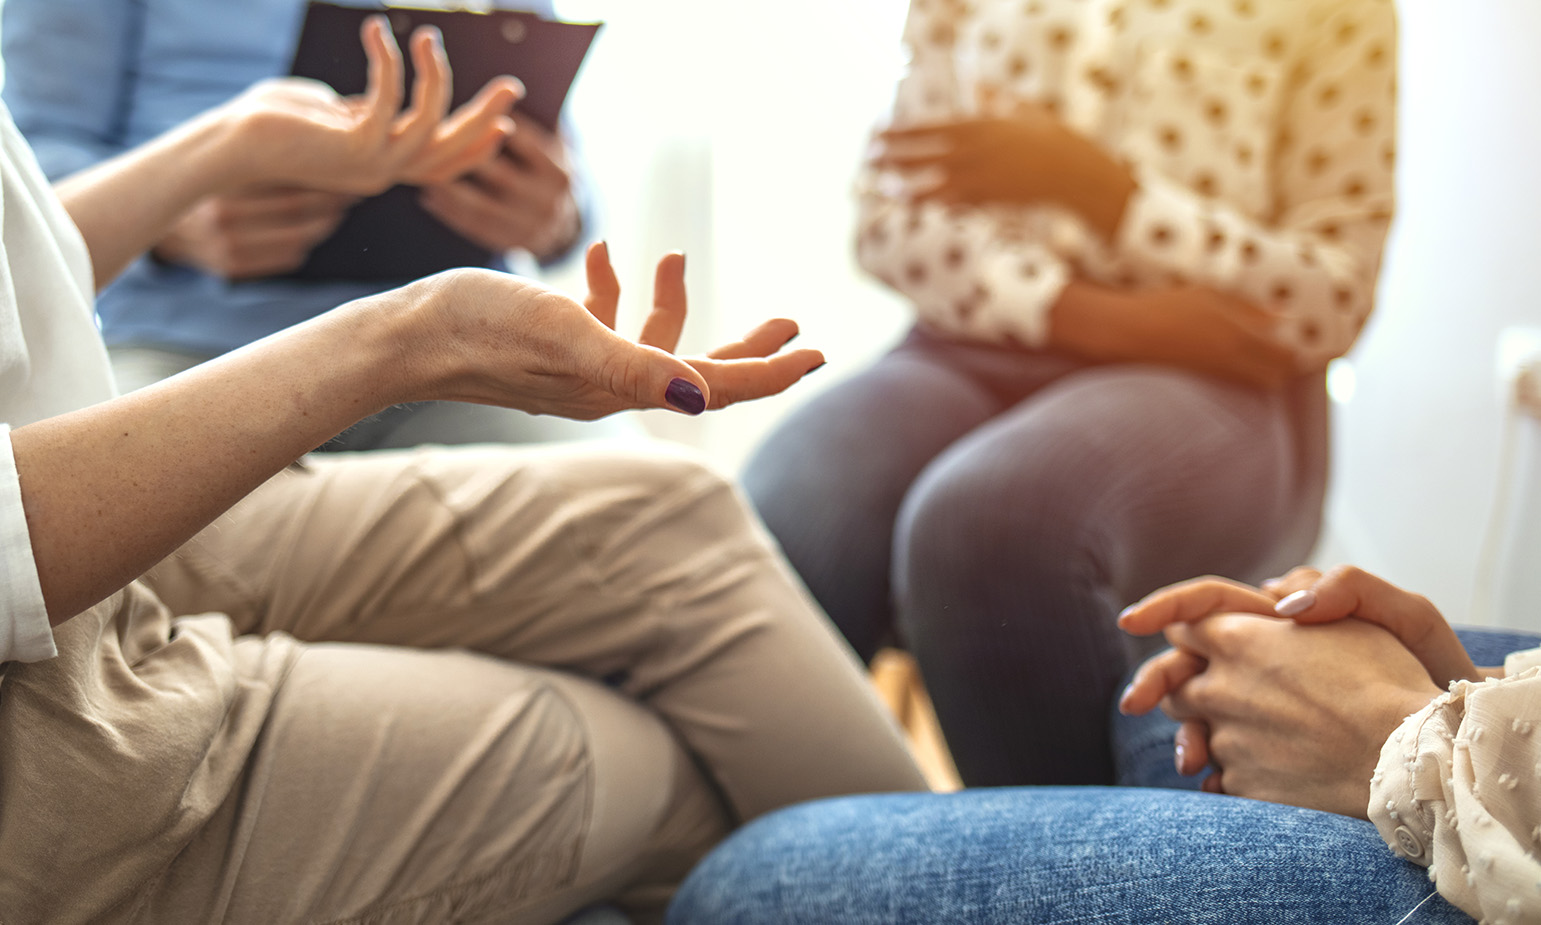 Woman's hands gesturing in small group sitting in circle, one person with clipboard, group therapy, support